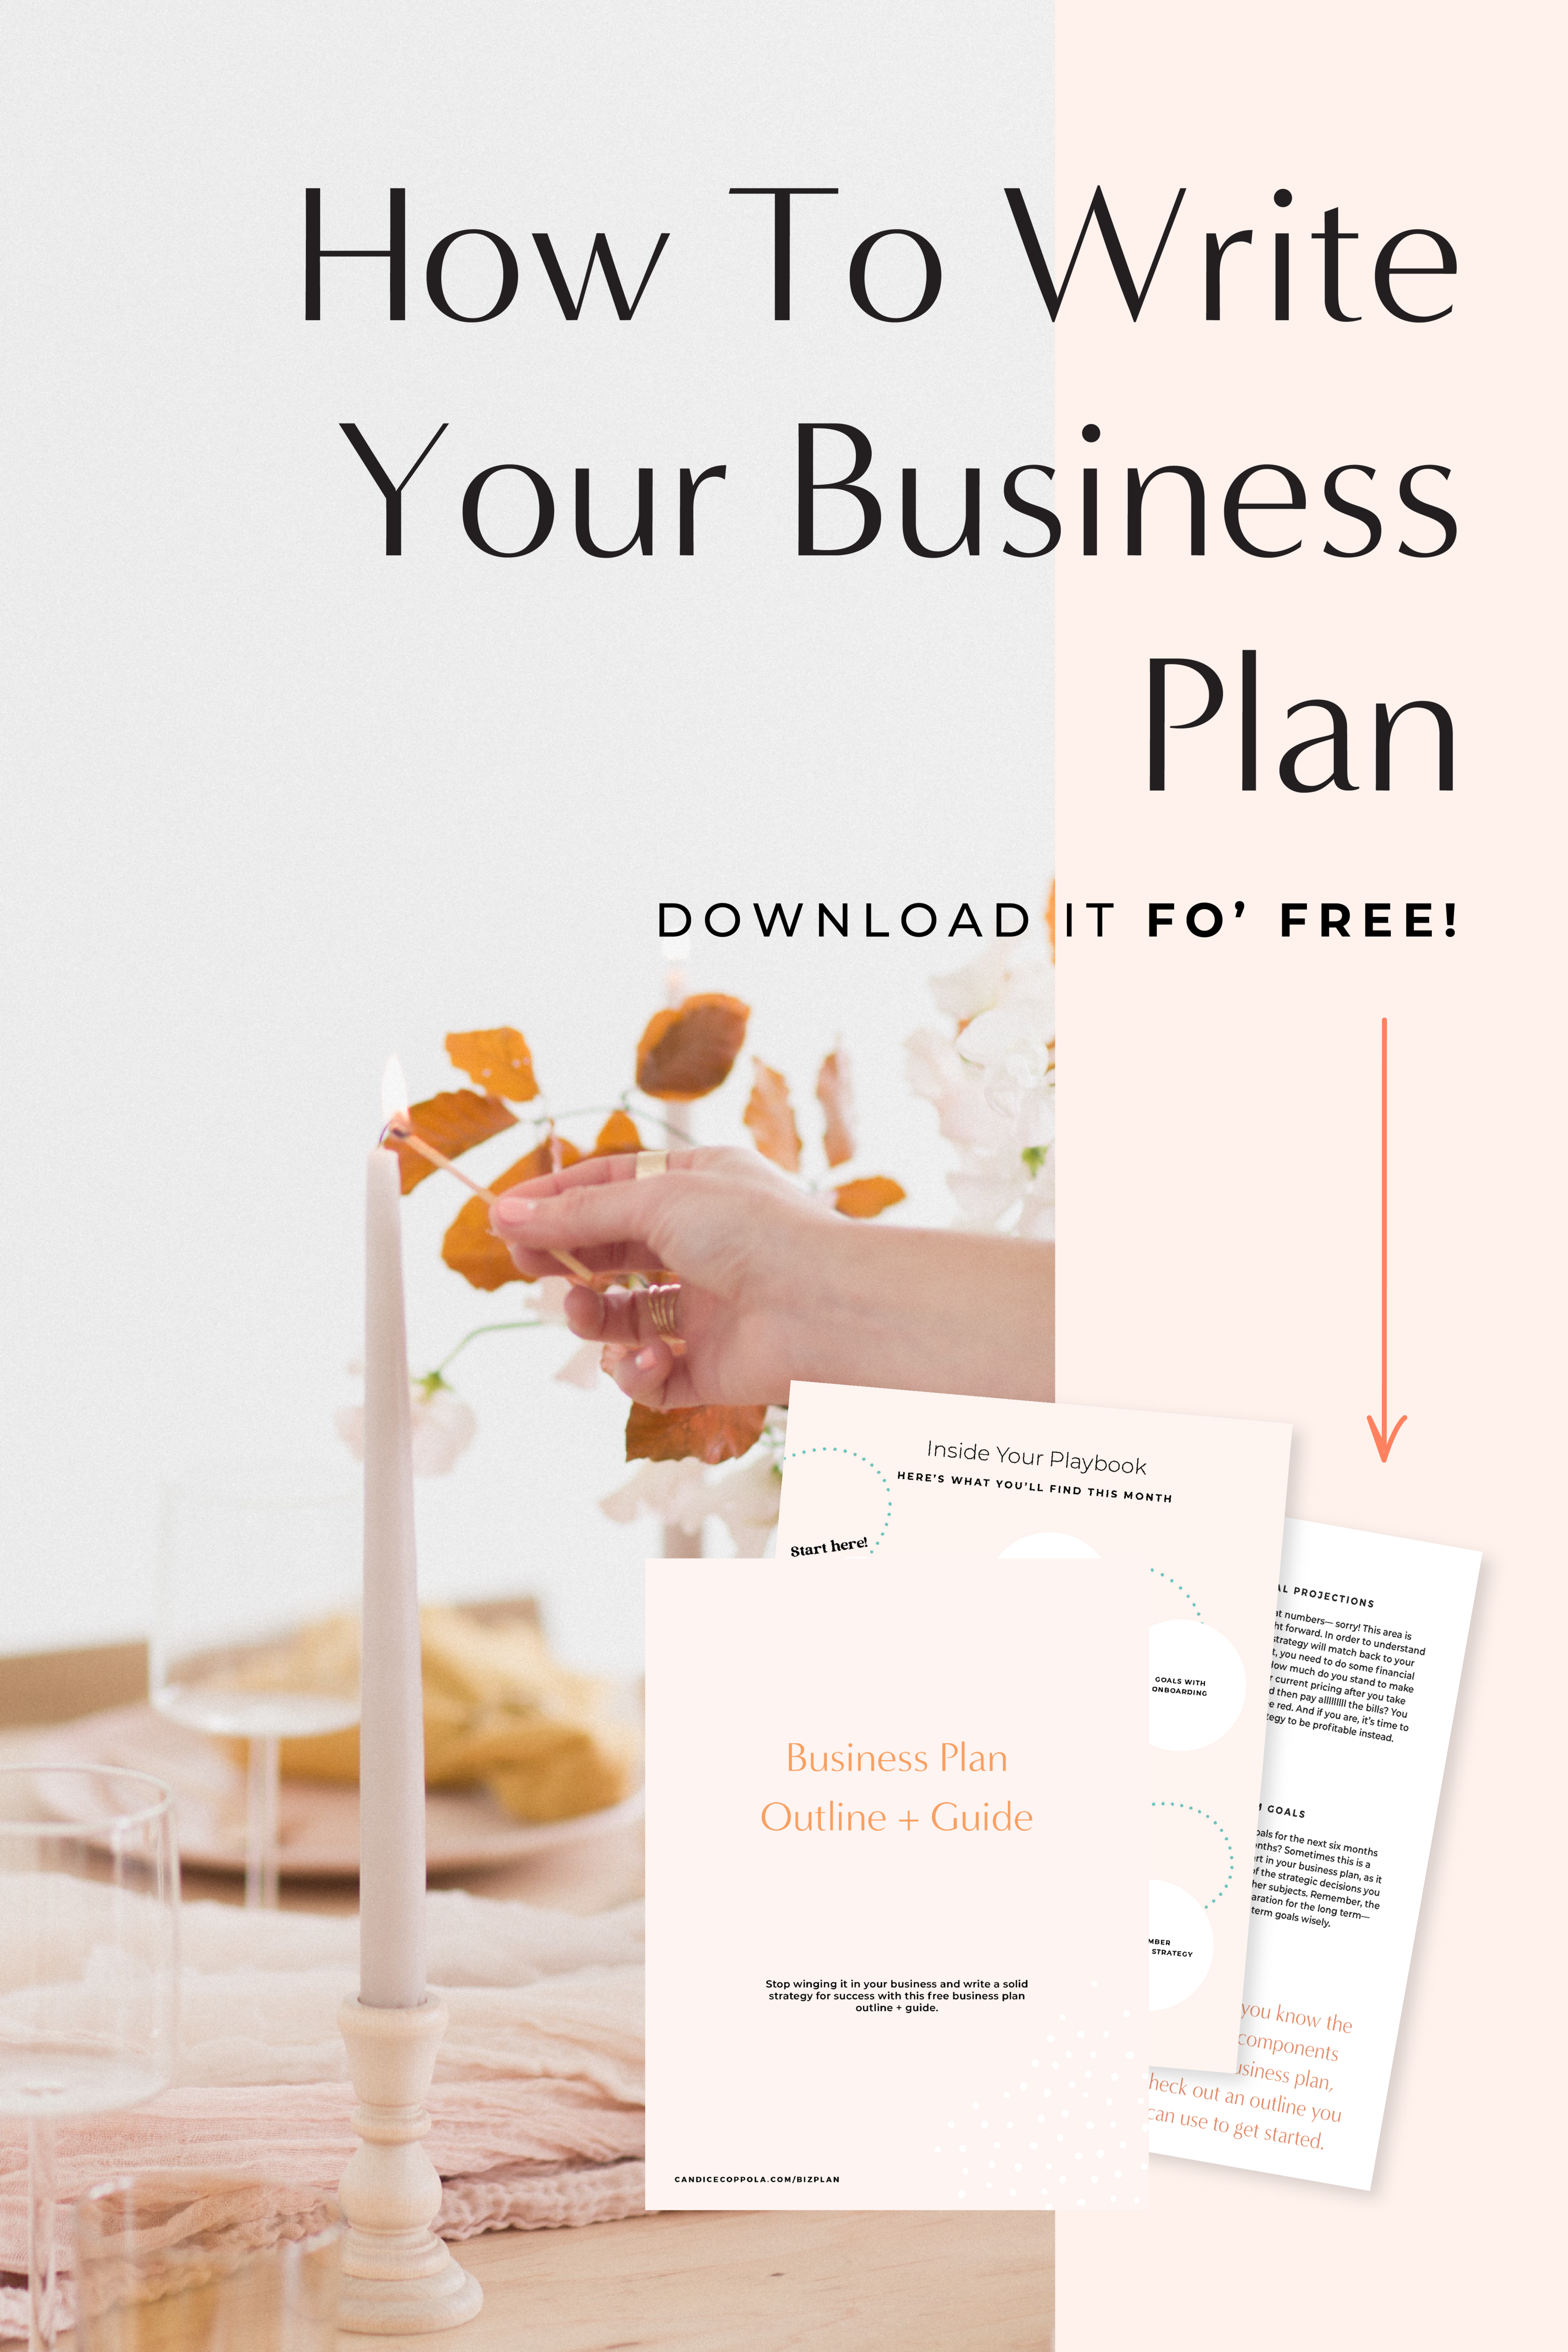 How to write a business plan - use this free business plan outline and guide to write your business plan as a wedding planner, wedding photographer, wedding florist, or wedding pro. Are you looking to scale your wedding business? Learn what's included in your business plan and how to write one.